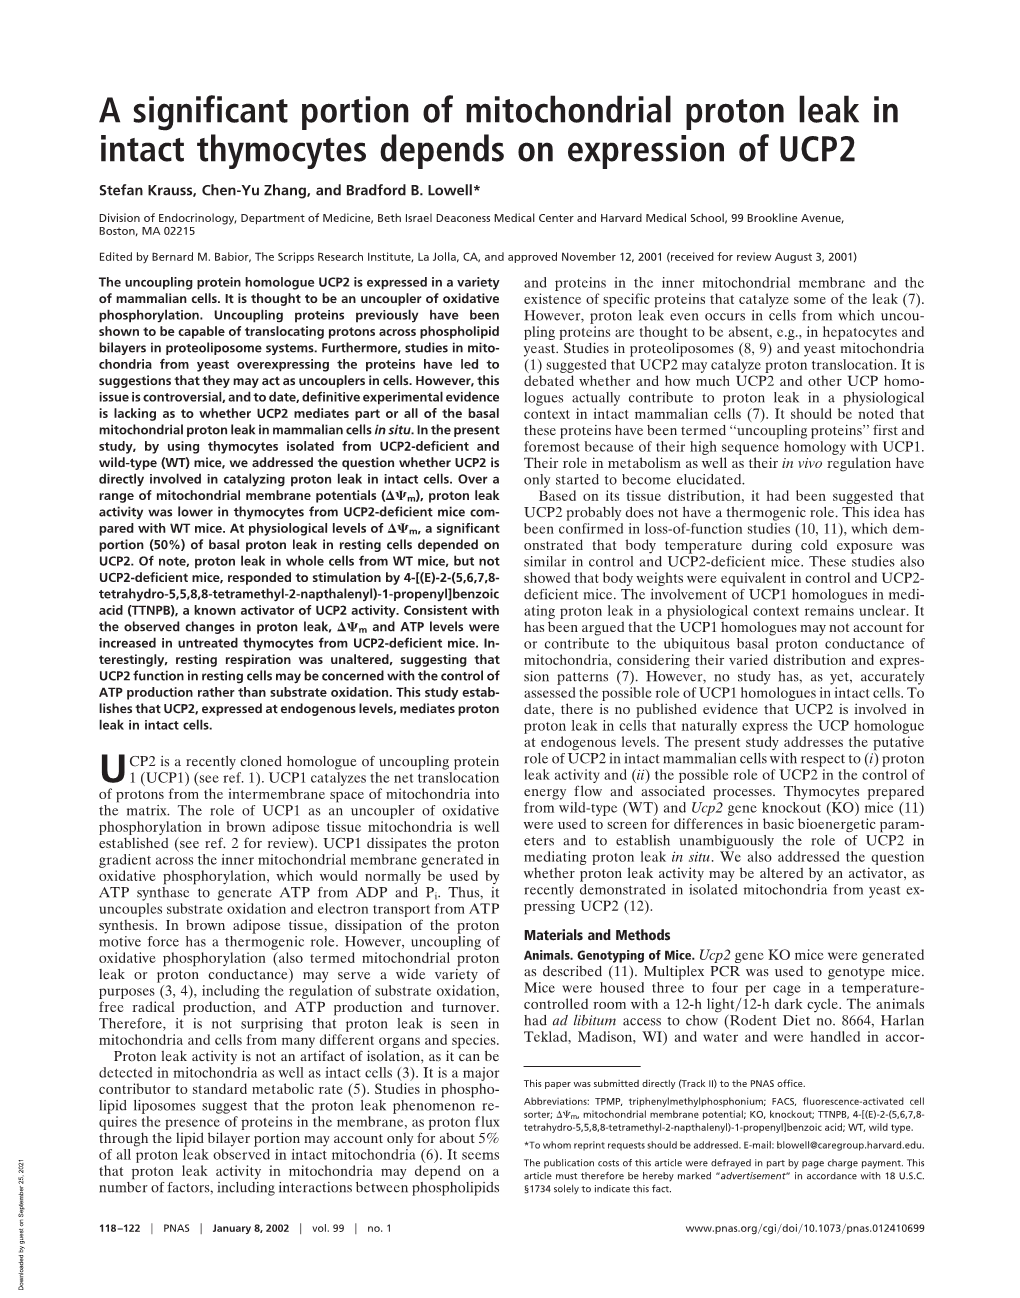 A Significant Portion of Mitochondrial Proton Leak in Intact Thymocytes Depends on Expression of UCP2